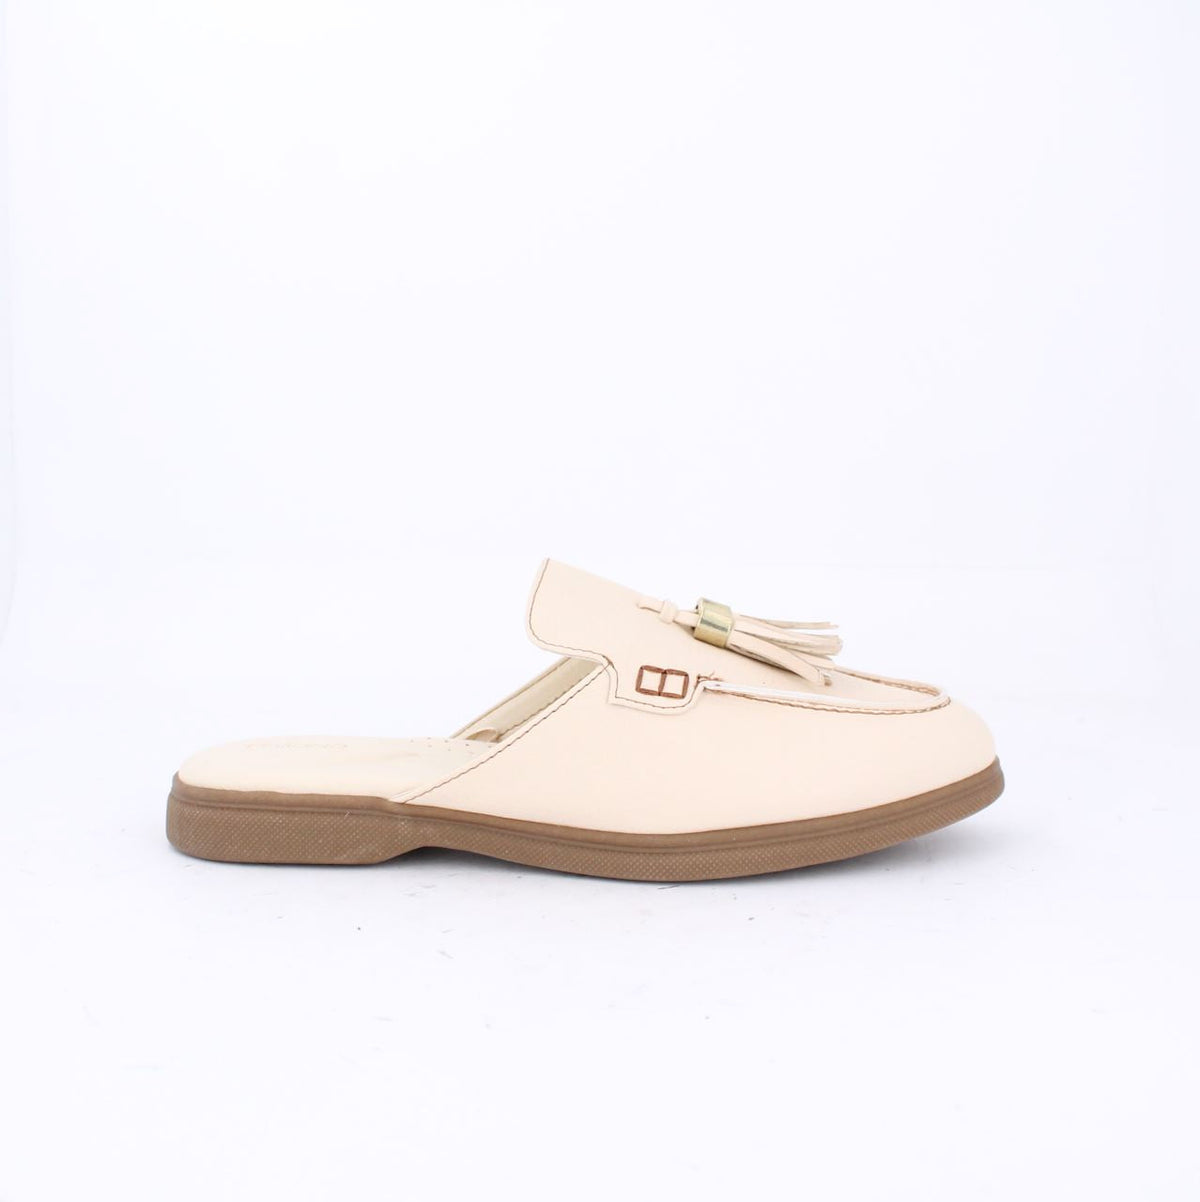 TARA LOAFERMULE-FLATS-LOAFERS & MOCCASINS-WHITE